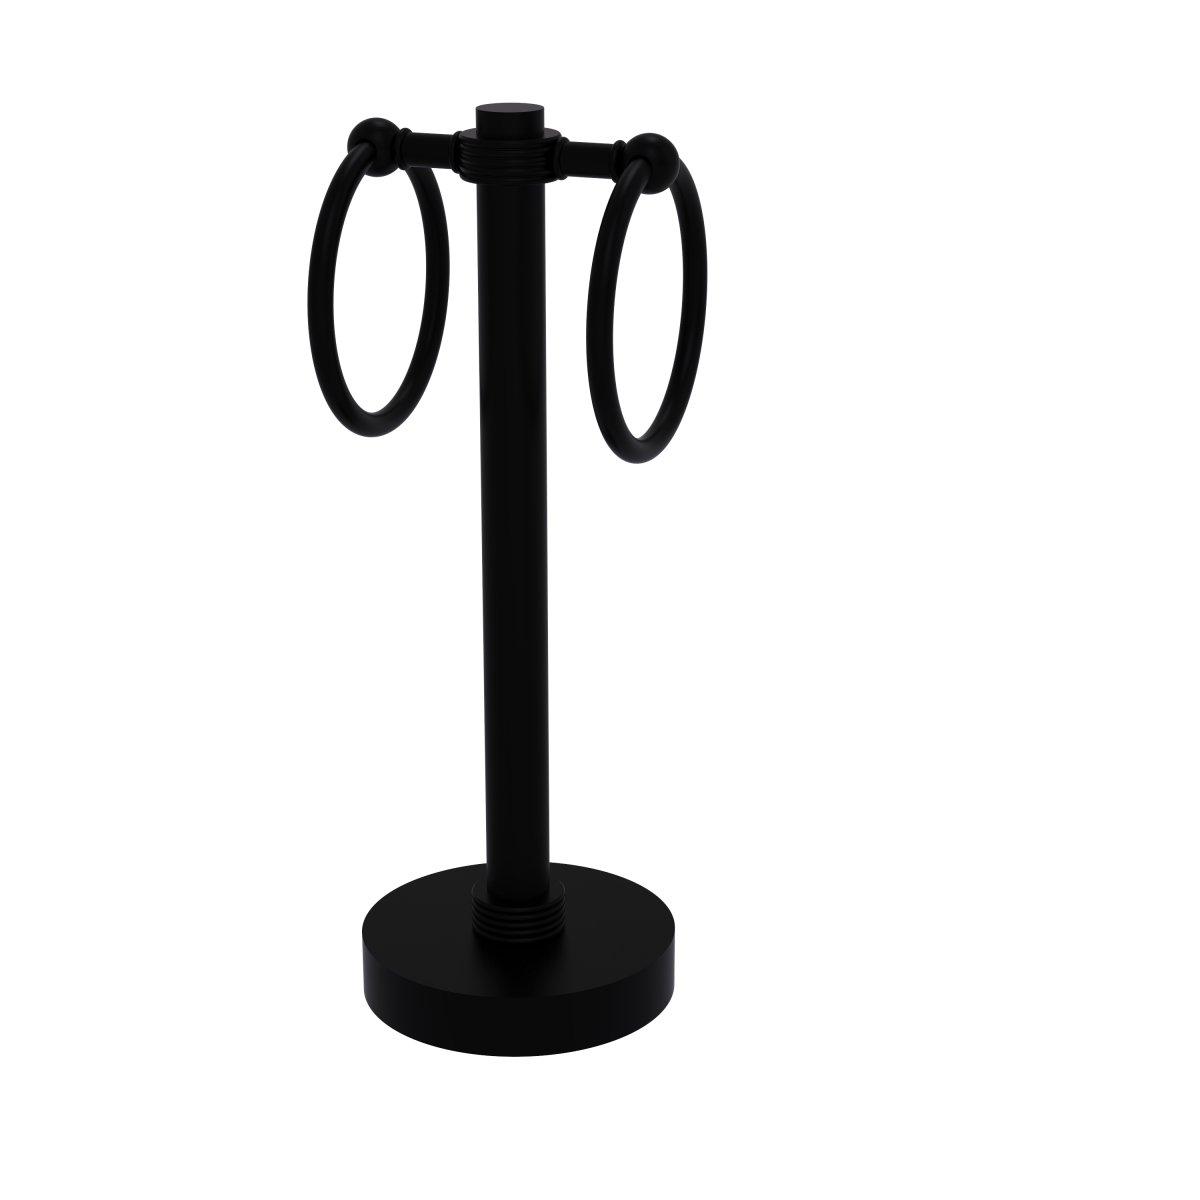 953g-bkm Vanity Top 2 Towel Ring Guest Towel Holder With Groovy Accents, Matte Black